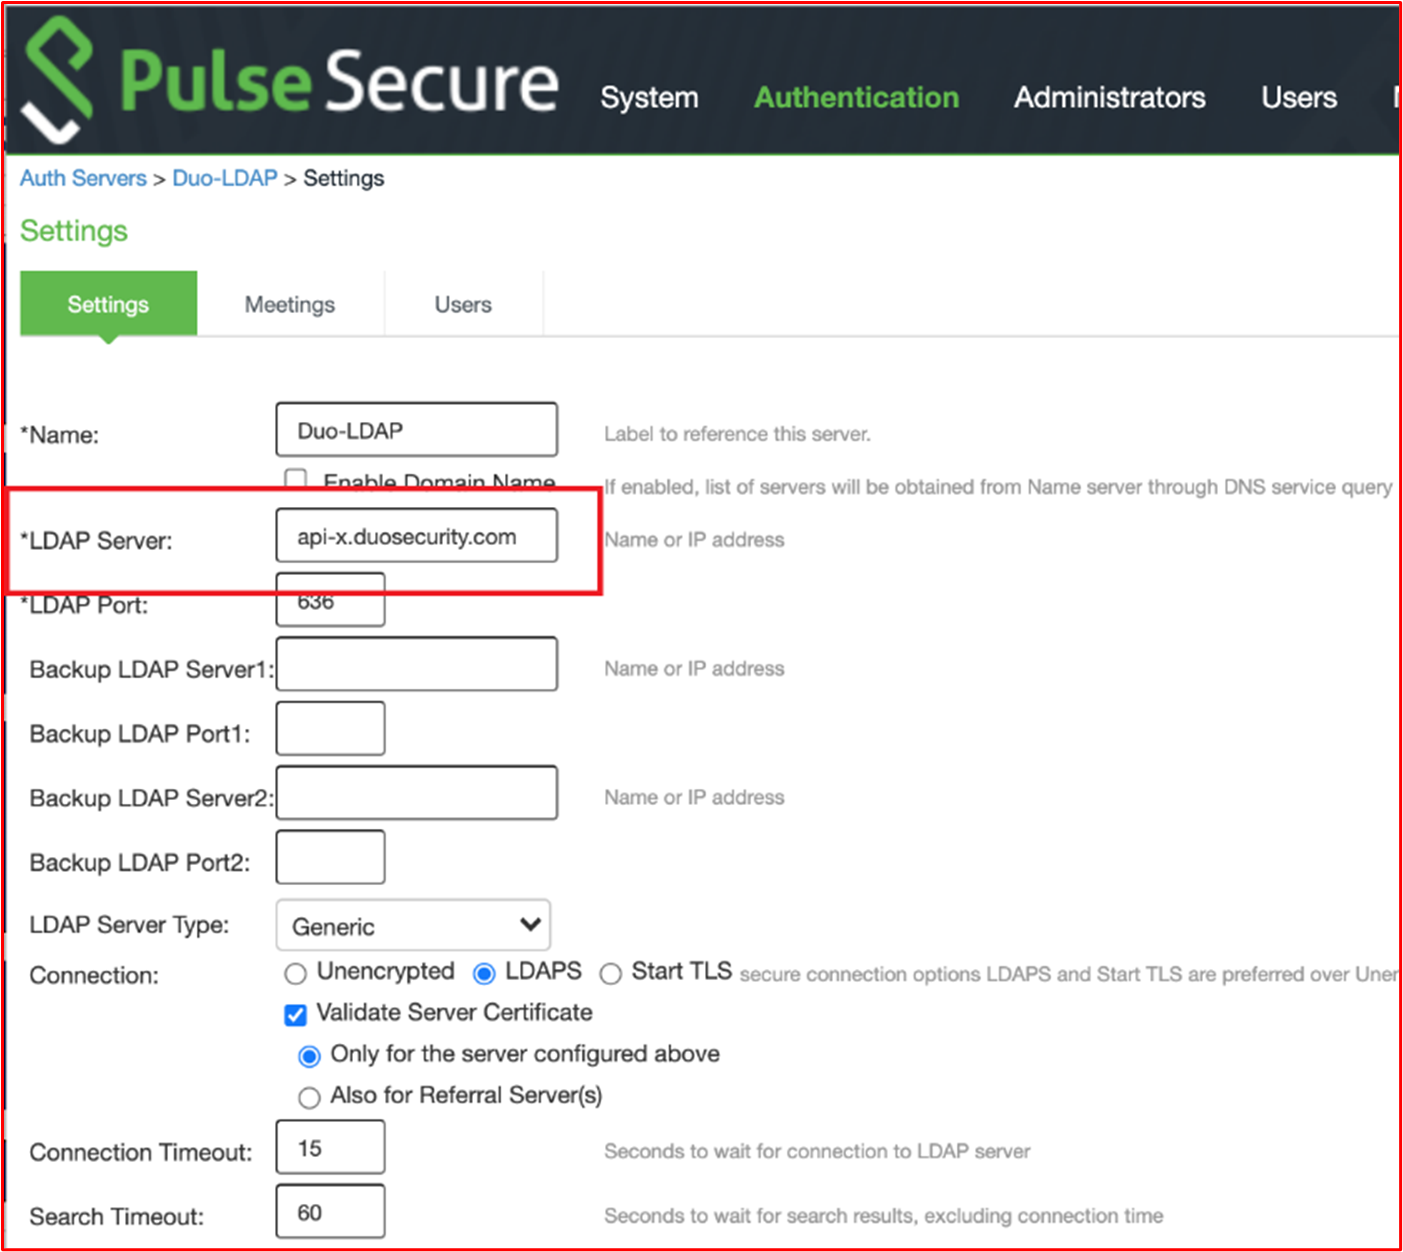 screenshot shows the configuration for the Duo-LDAP authentication server which demonstrates that this is pointing to the Duo SaaS service for MFA.